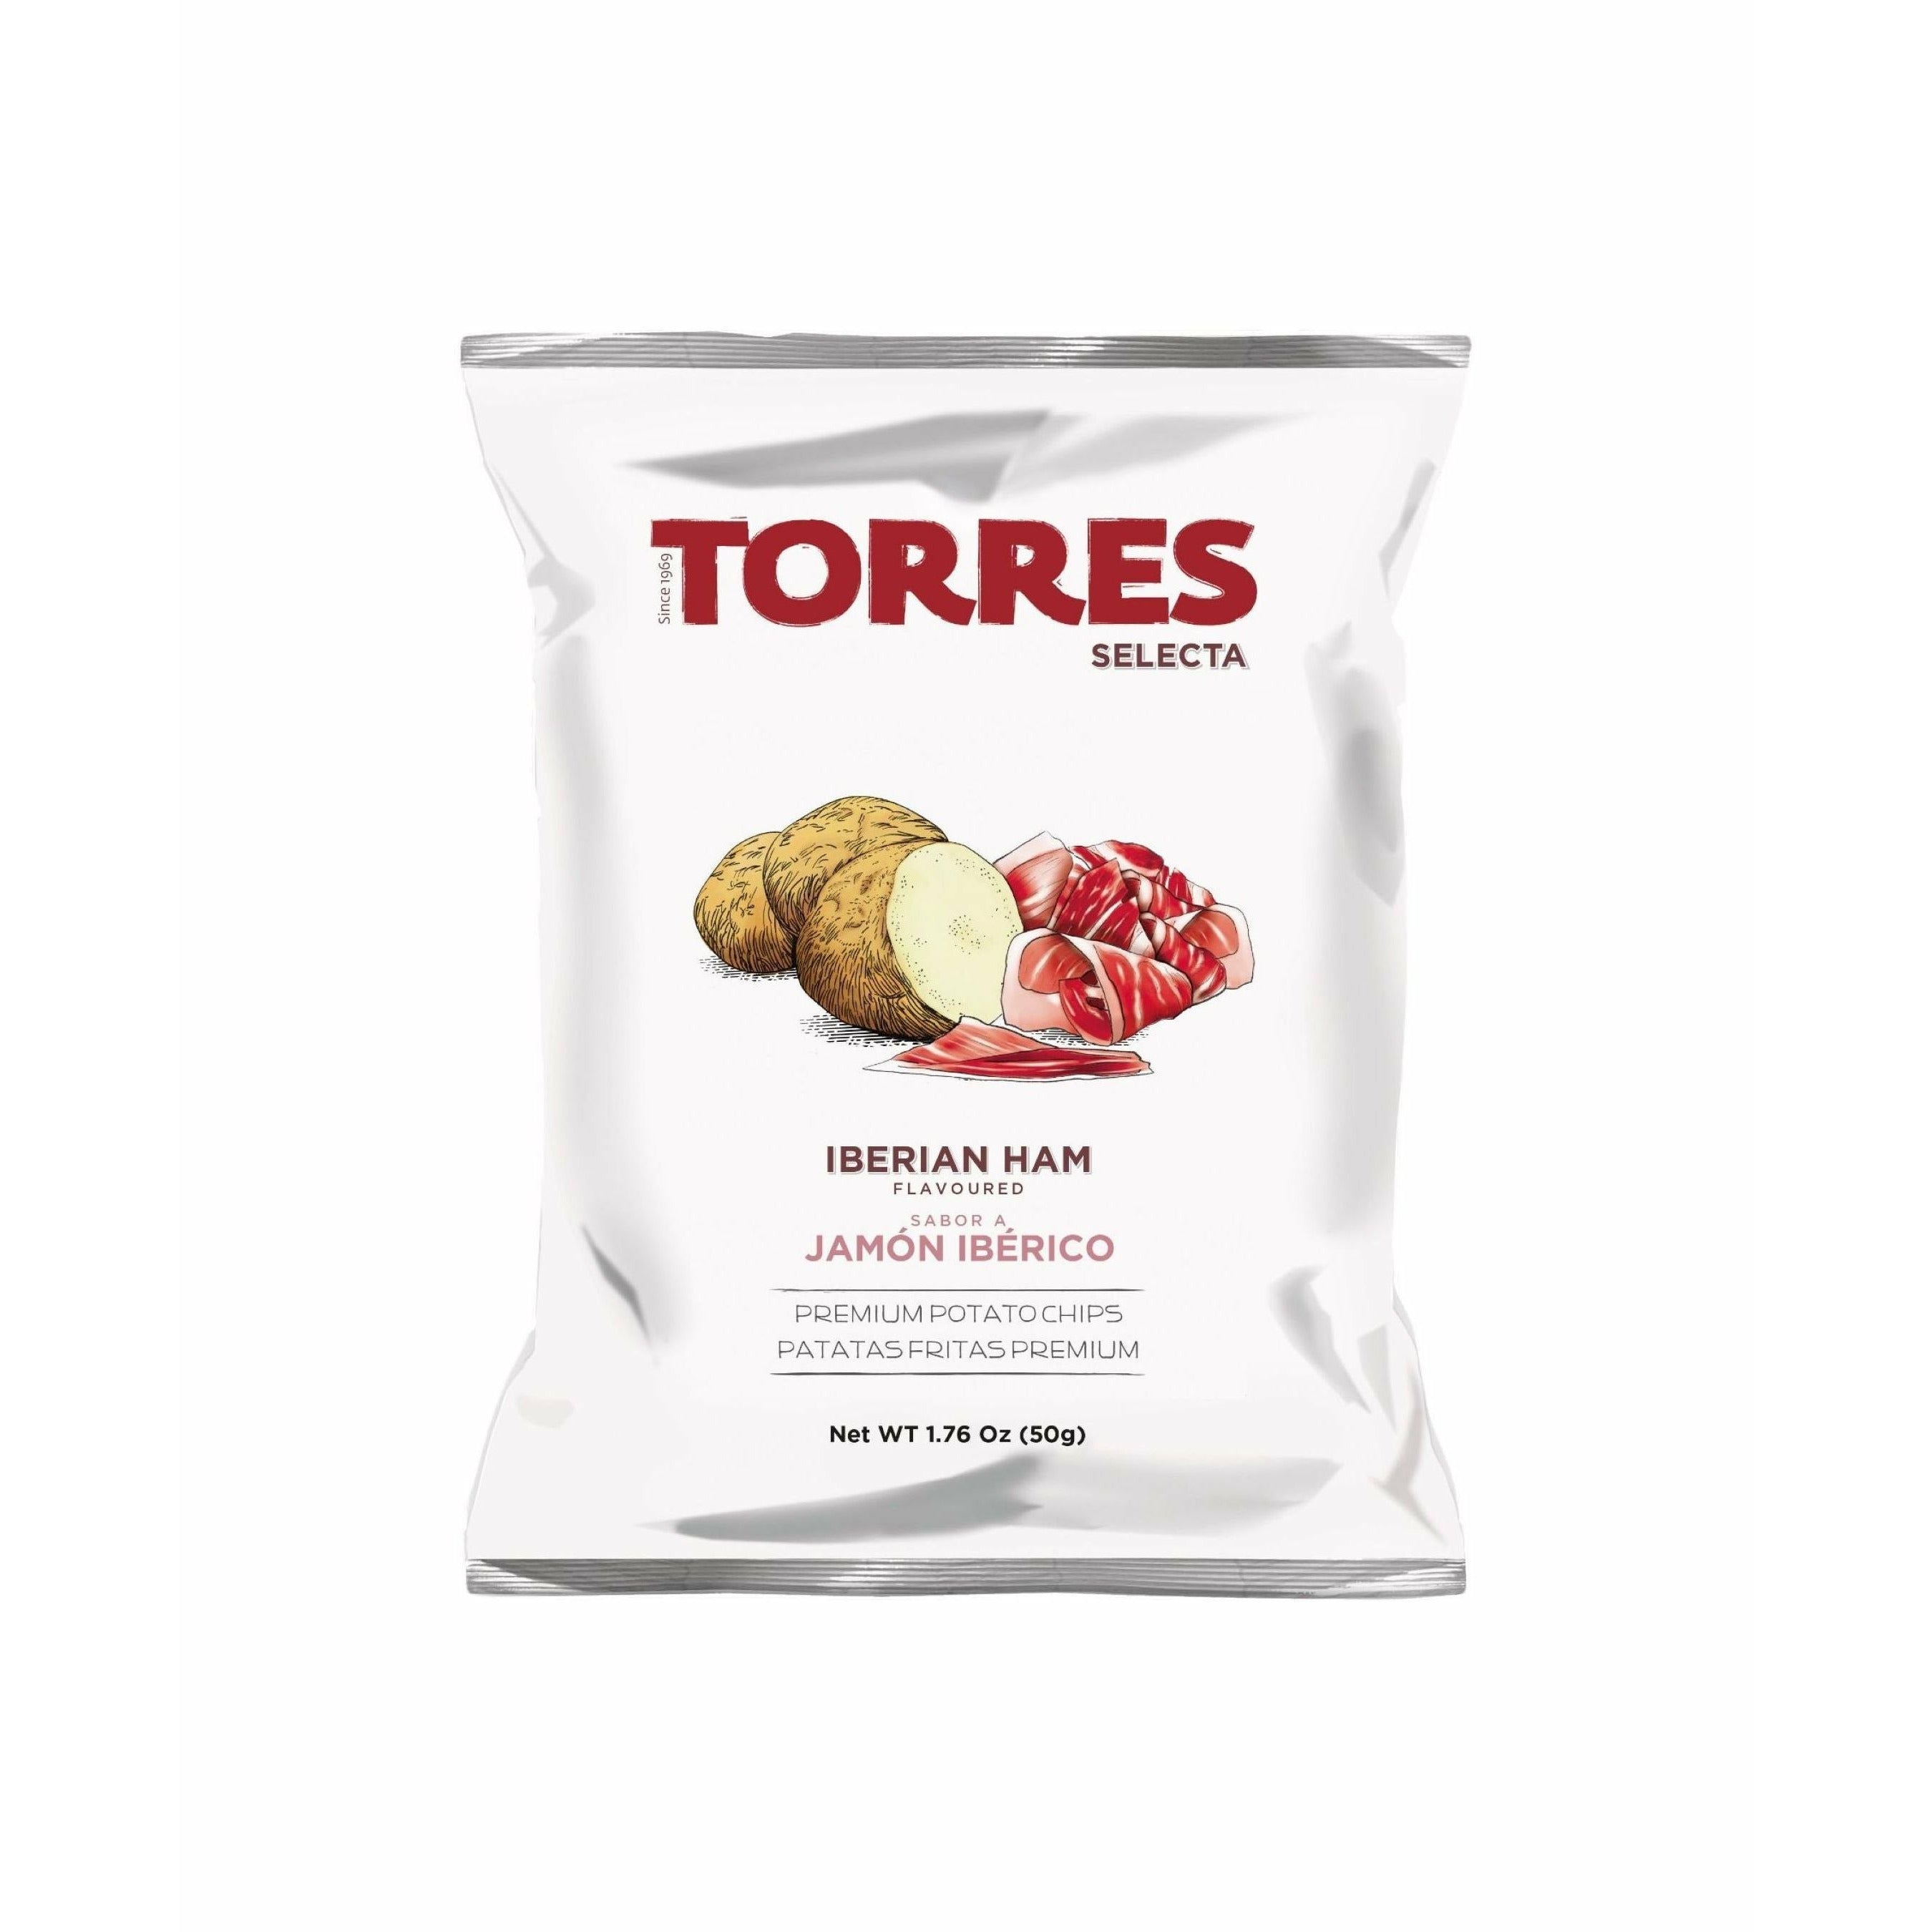 Torres Selecta Iberico Chic Chips, 50g